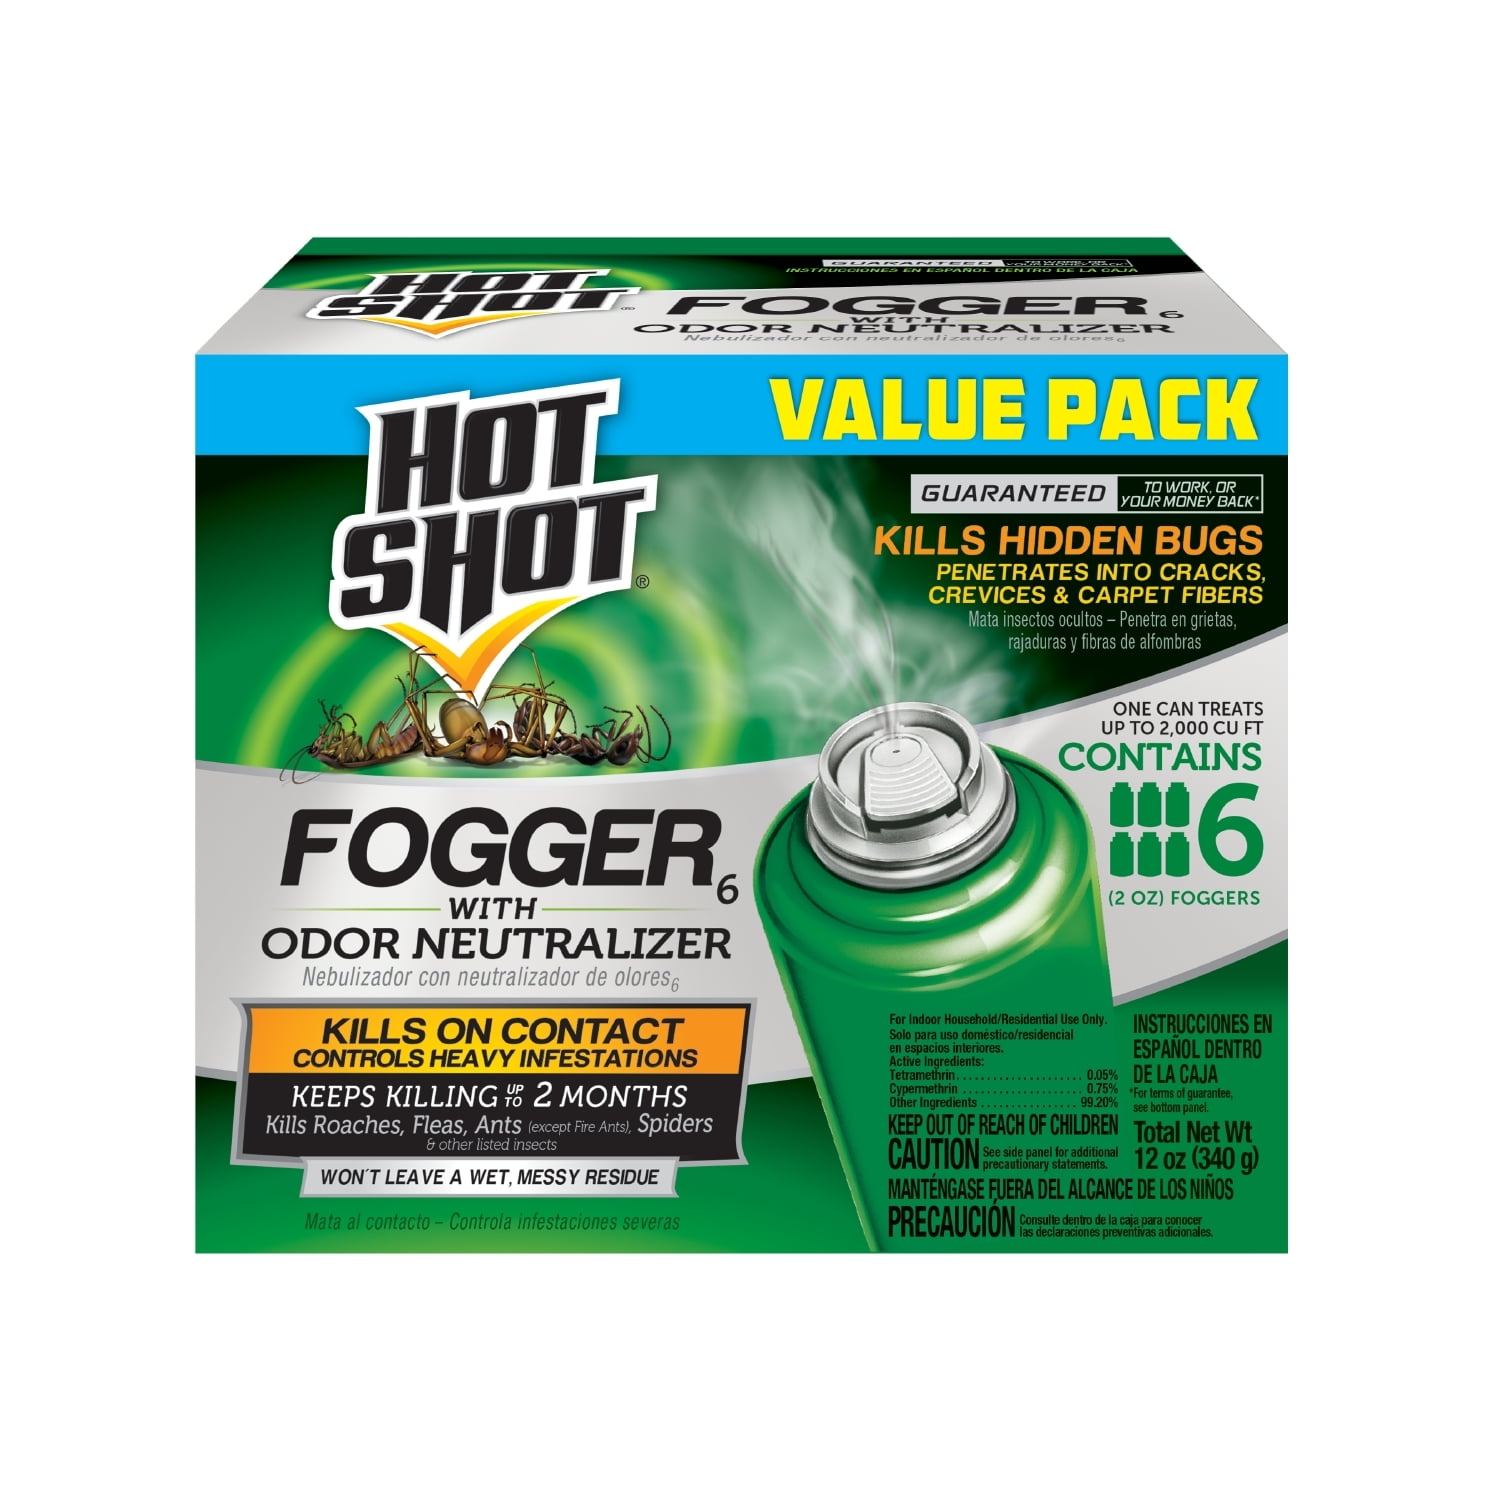 Hot Shot Fogger 6 with Odor Neutralizer, 6 Count, 2 oz.